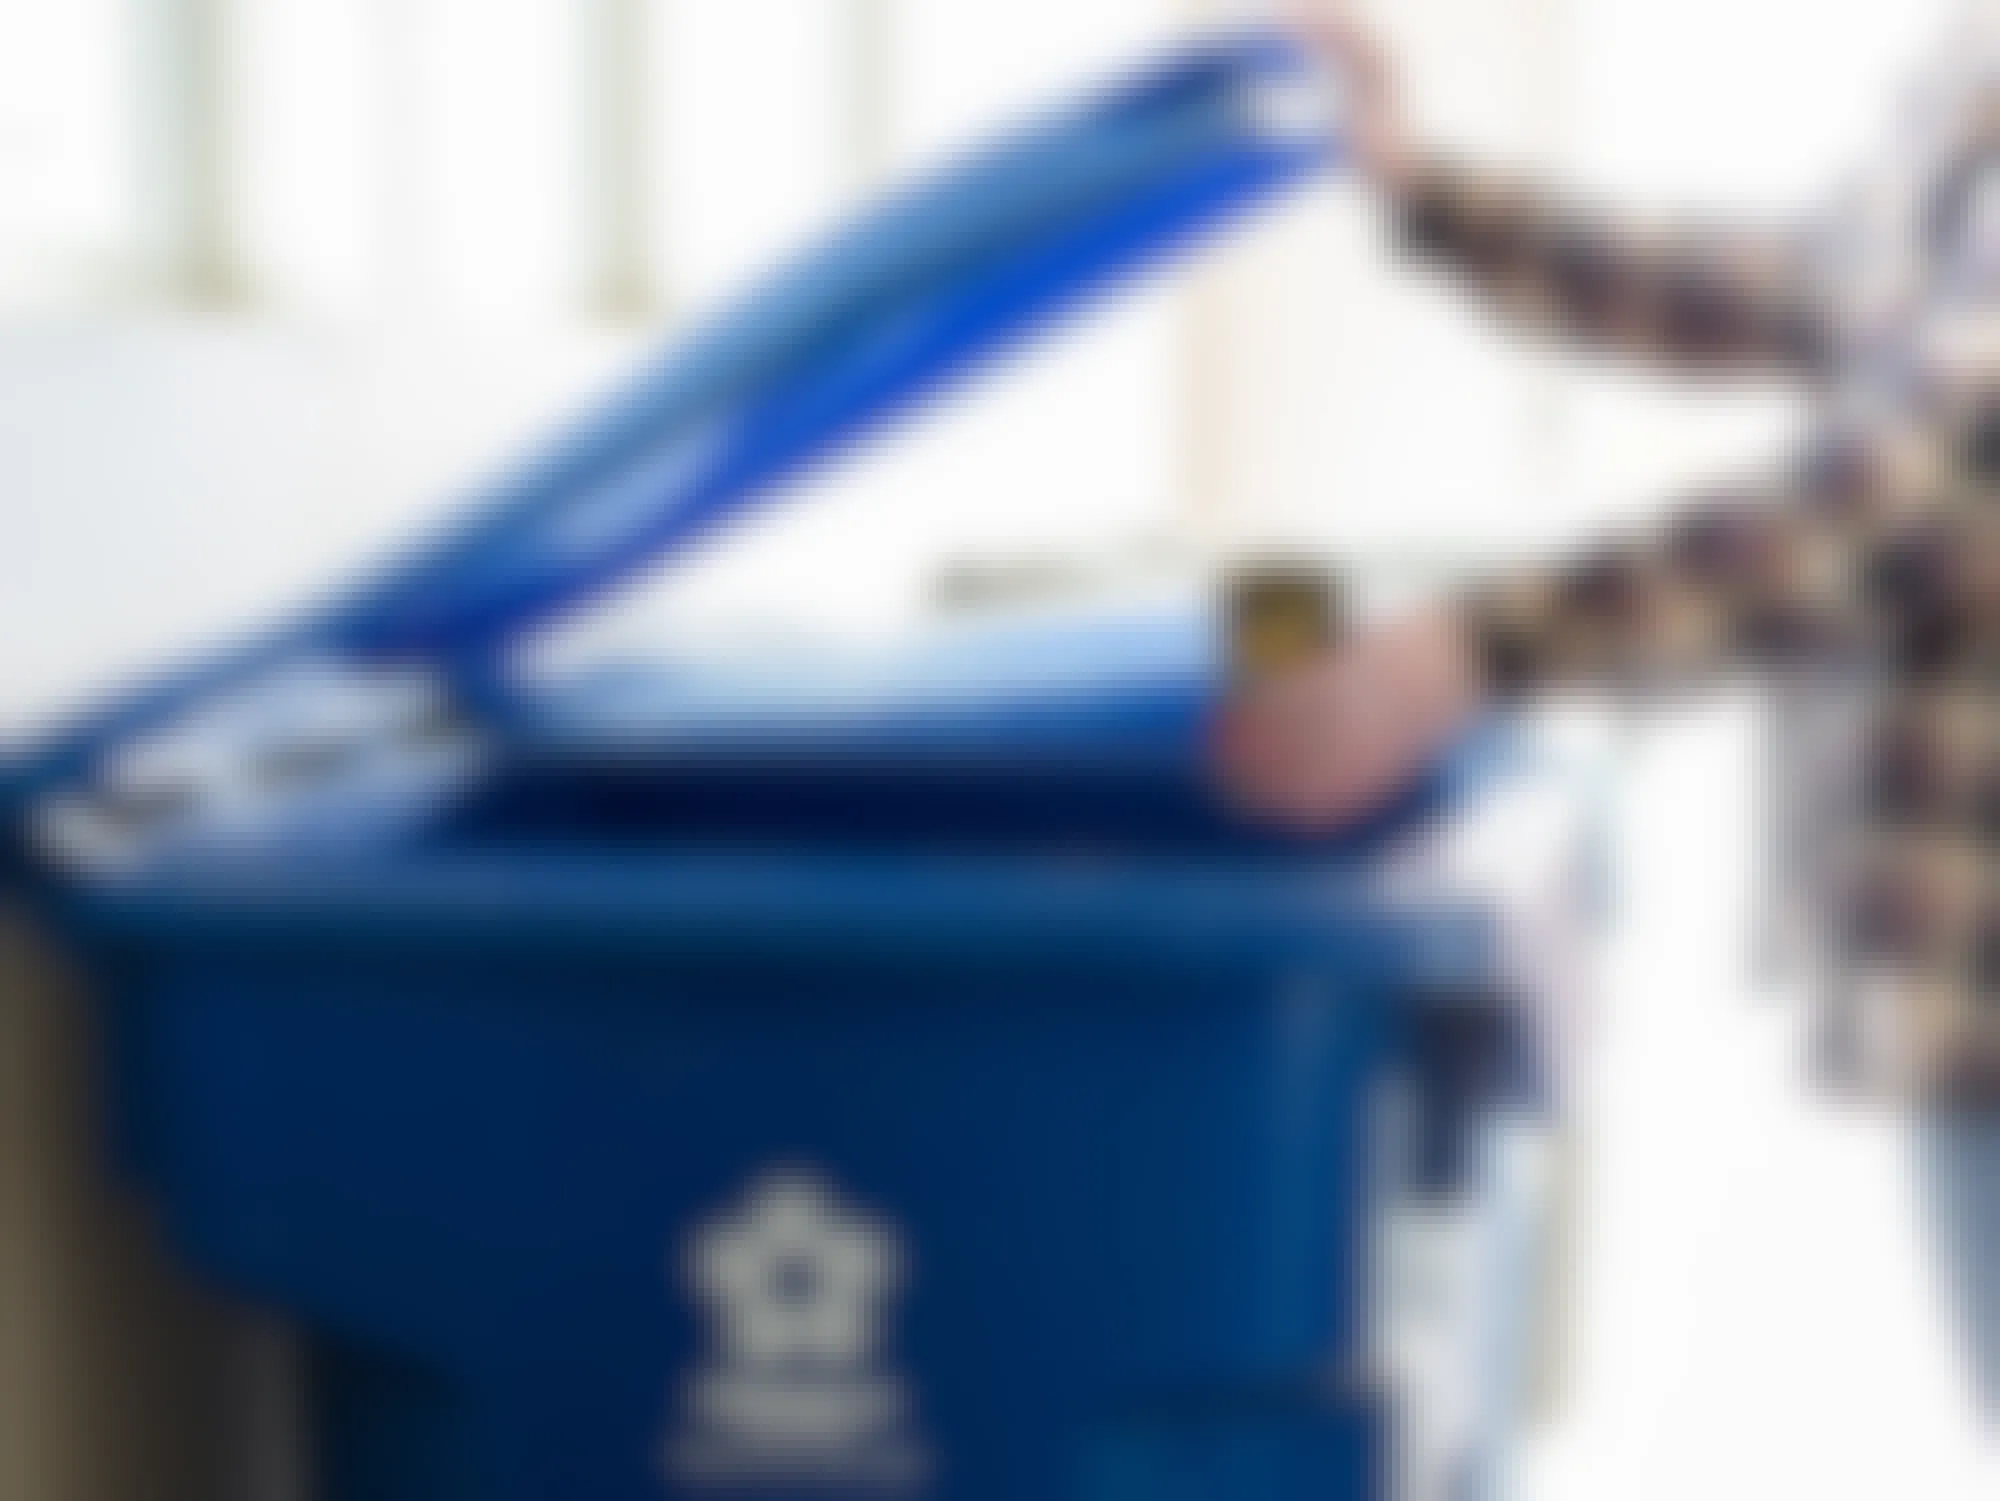 a person recycling cans into a recycling bin 